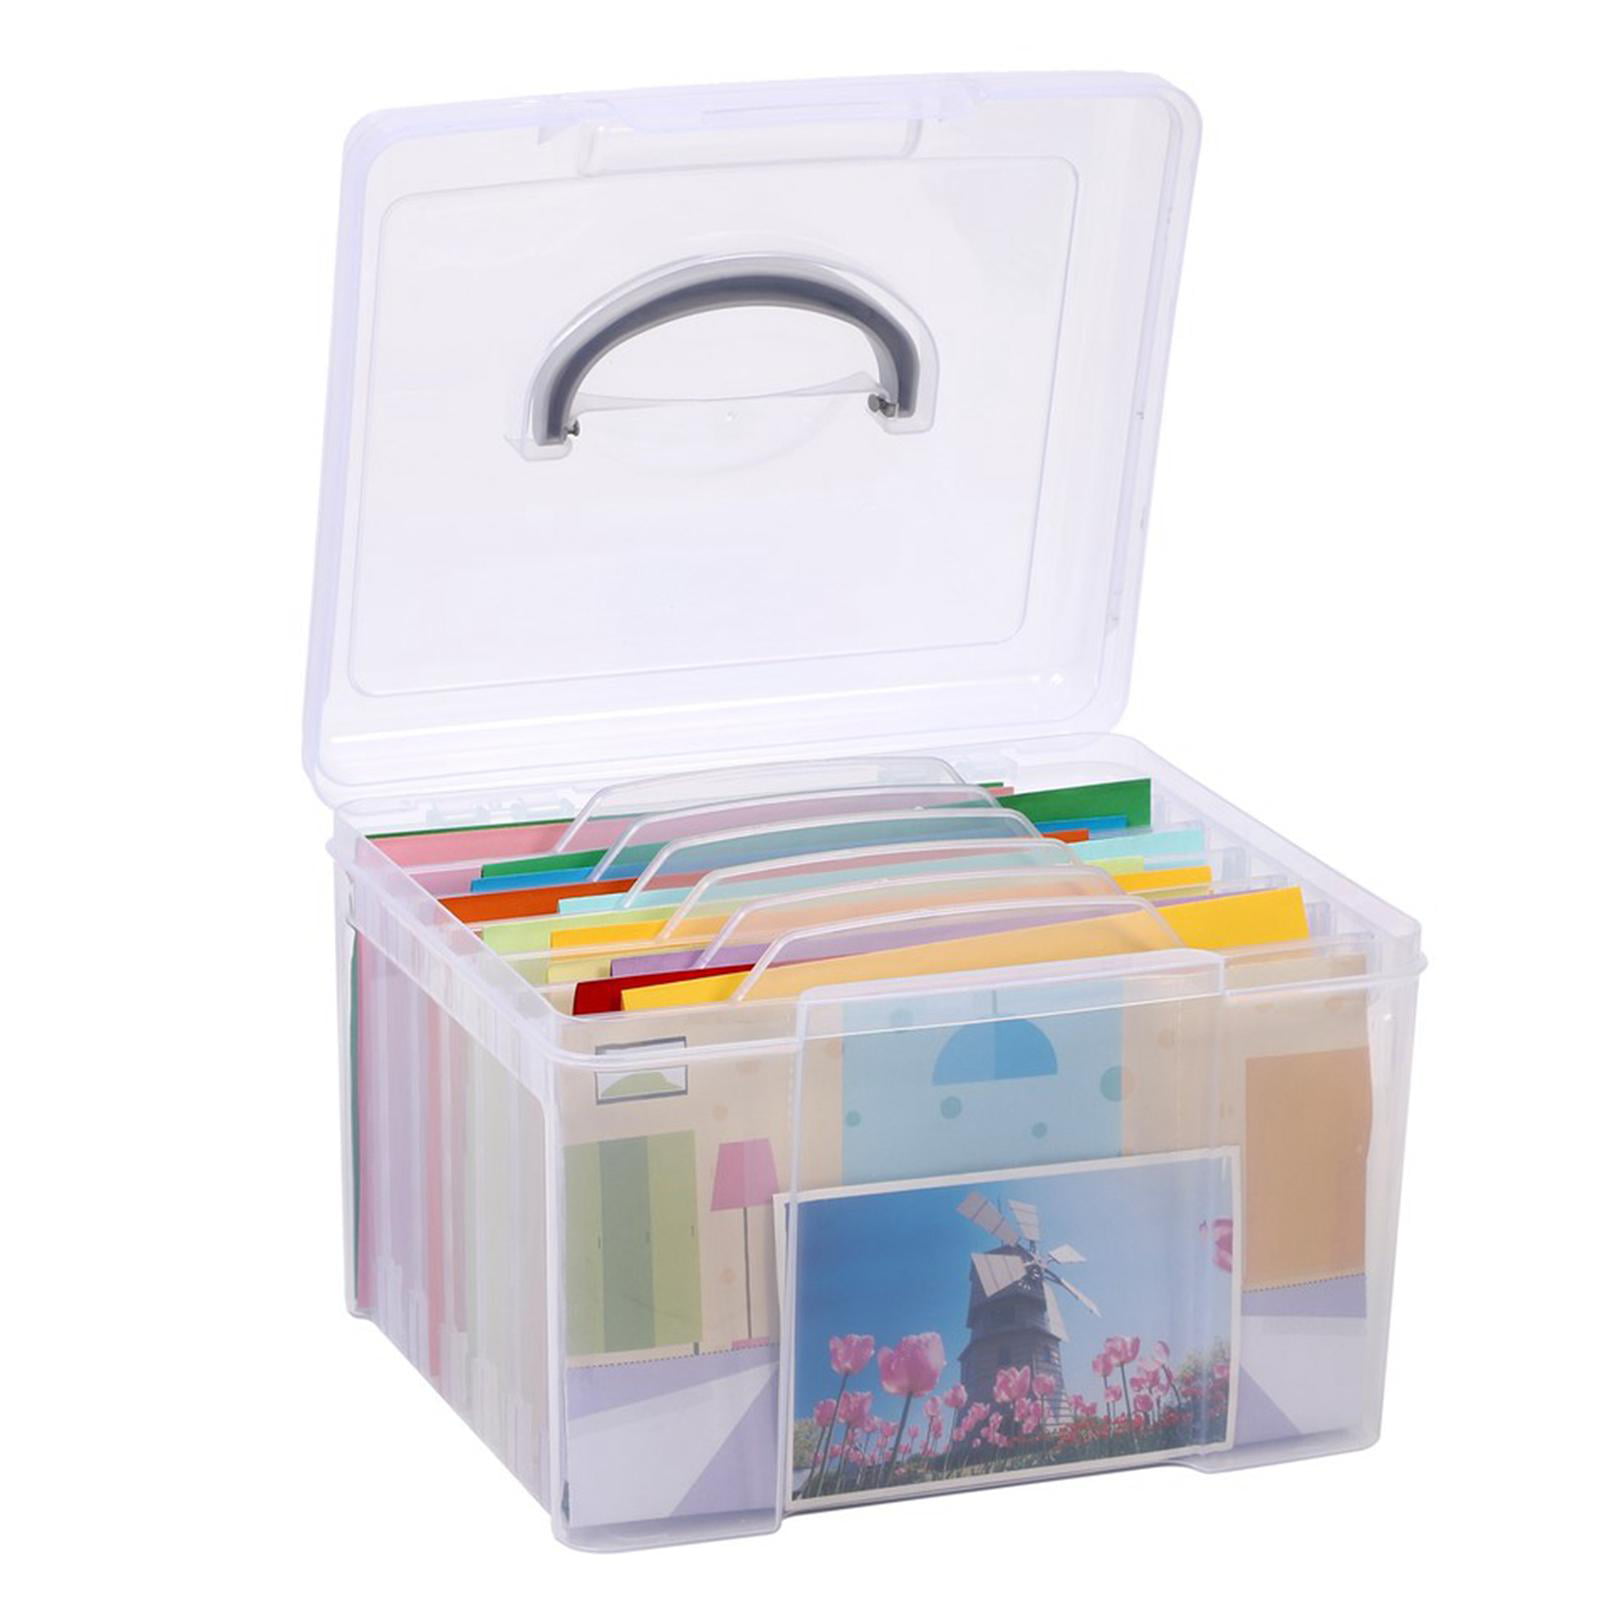 Photo Organizer Box with Dividers File Holder w/ 6 Dividers Portable Case Greeting Card Storage Box Photos Organizer for Card Recipes Paper Books